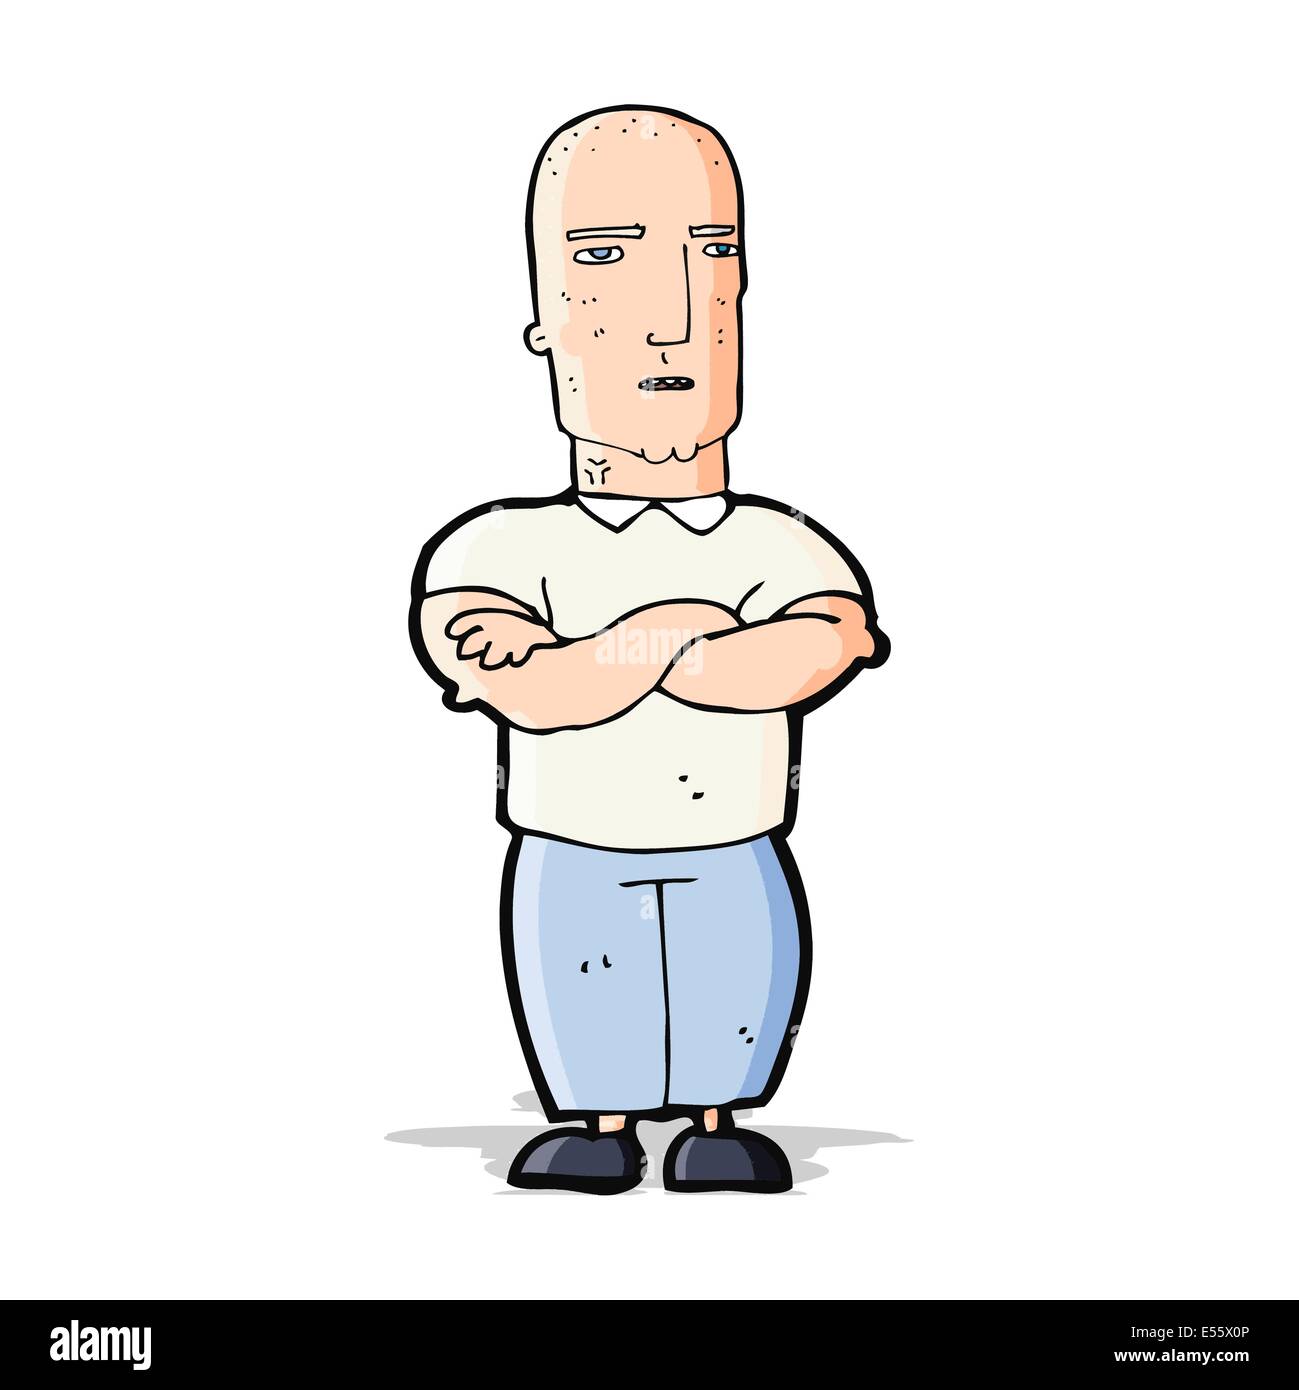 Cartoon of an Aggressive Bald Man in a Suit Yells Menacingly Stock Vector -  Illustration of yells, person: 102555418